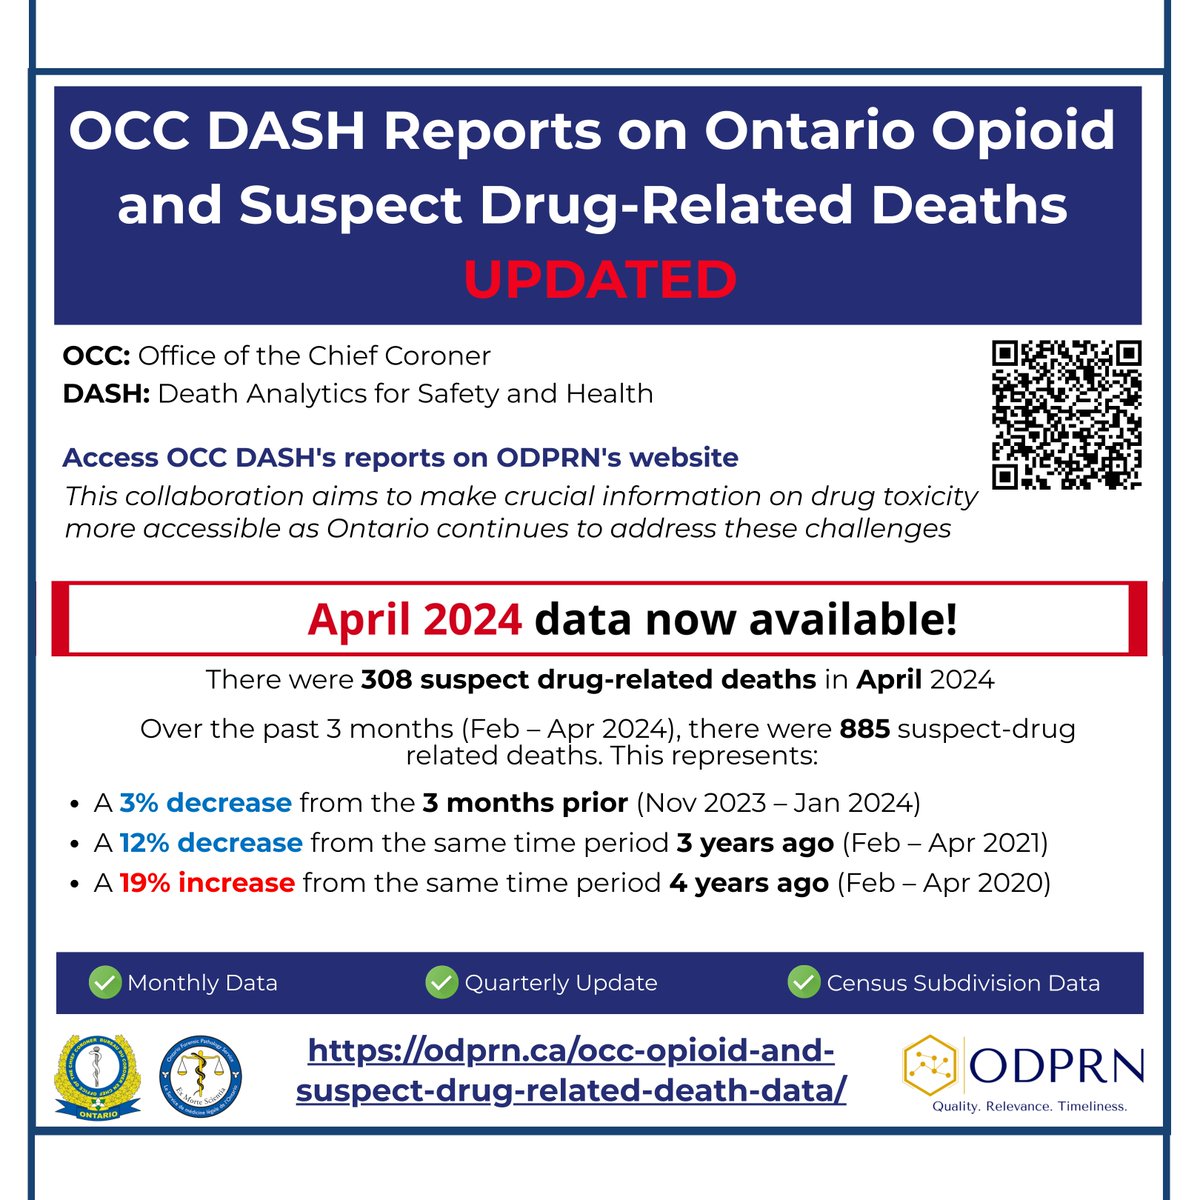 April data on #opioid-related deaths in #Ontario from the Office of the Chief Coroner (OCC) is now available on ODPRN's website. 🚨In April 2024, there were 308 reported suspect drug-related deaths in Ontario. More information available at odprn.ca/occ-opioid-and…